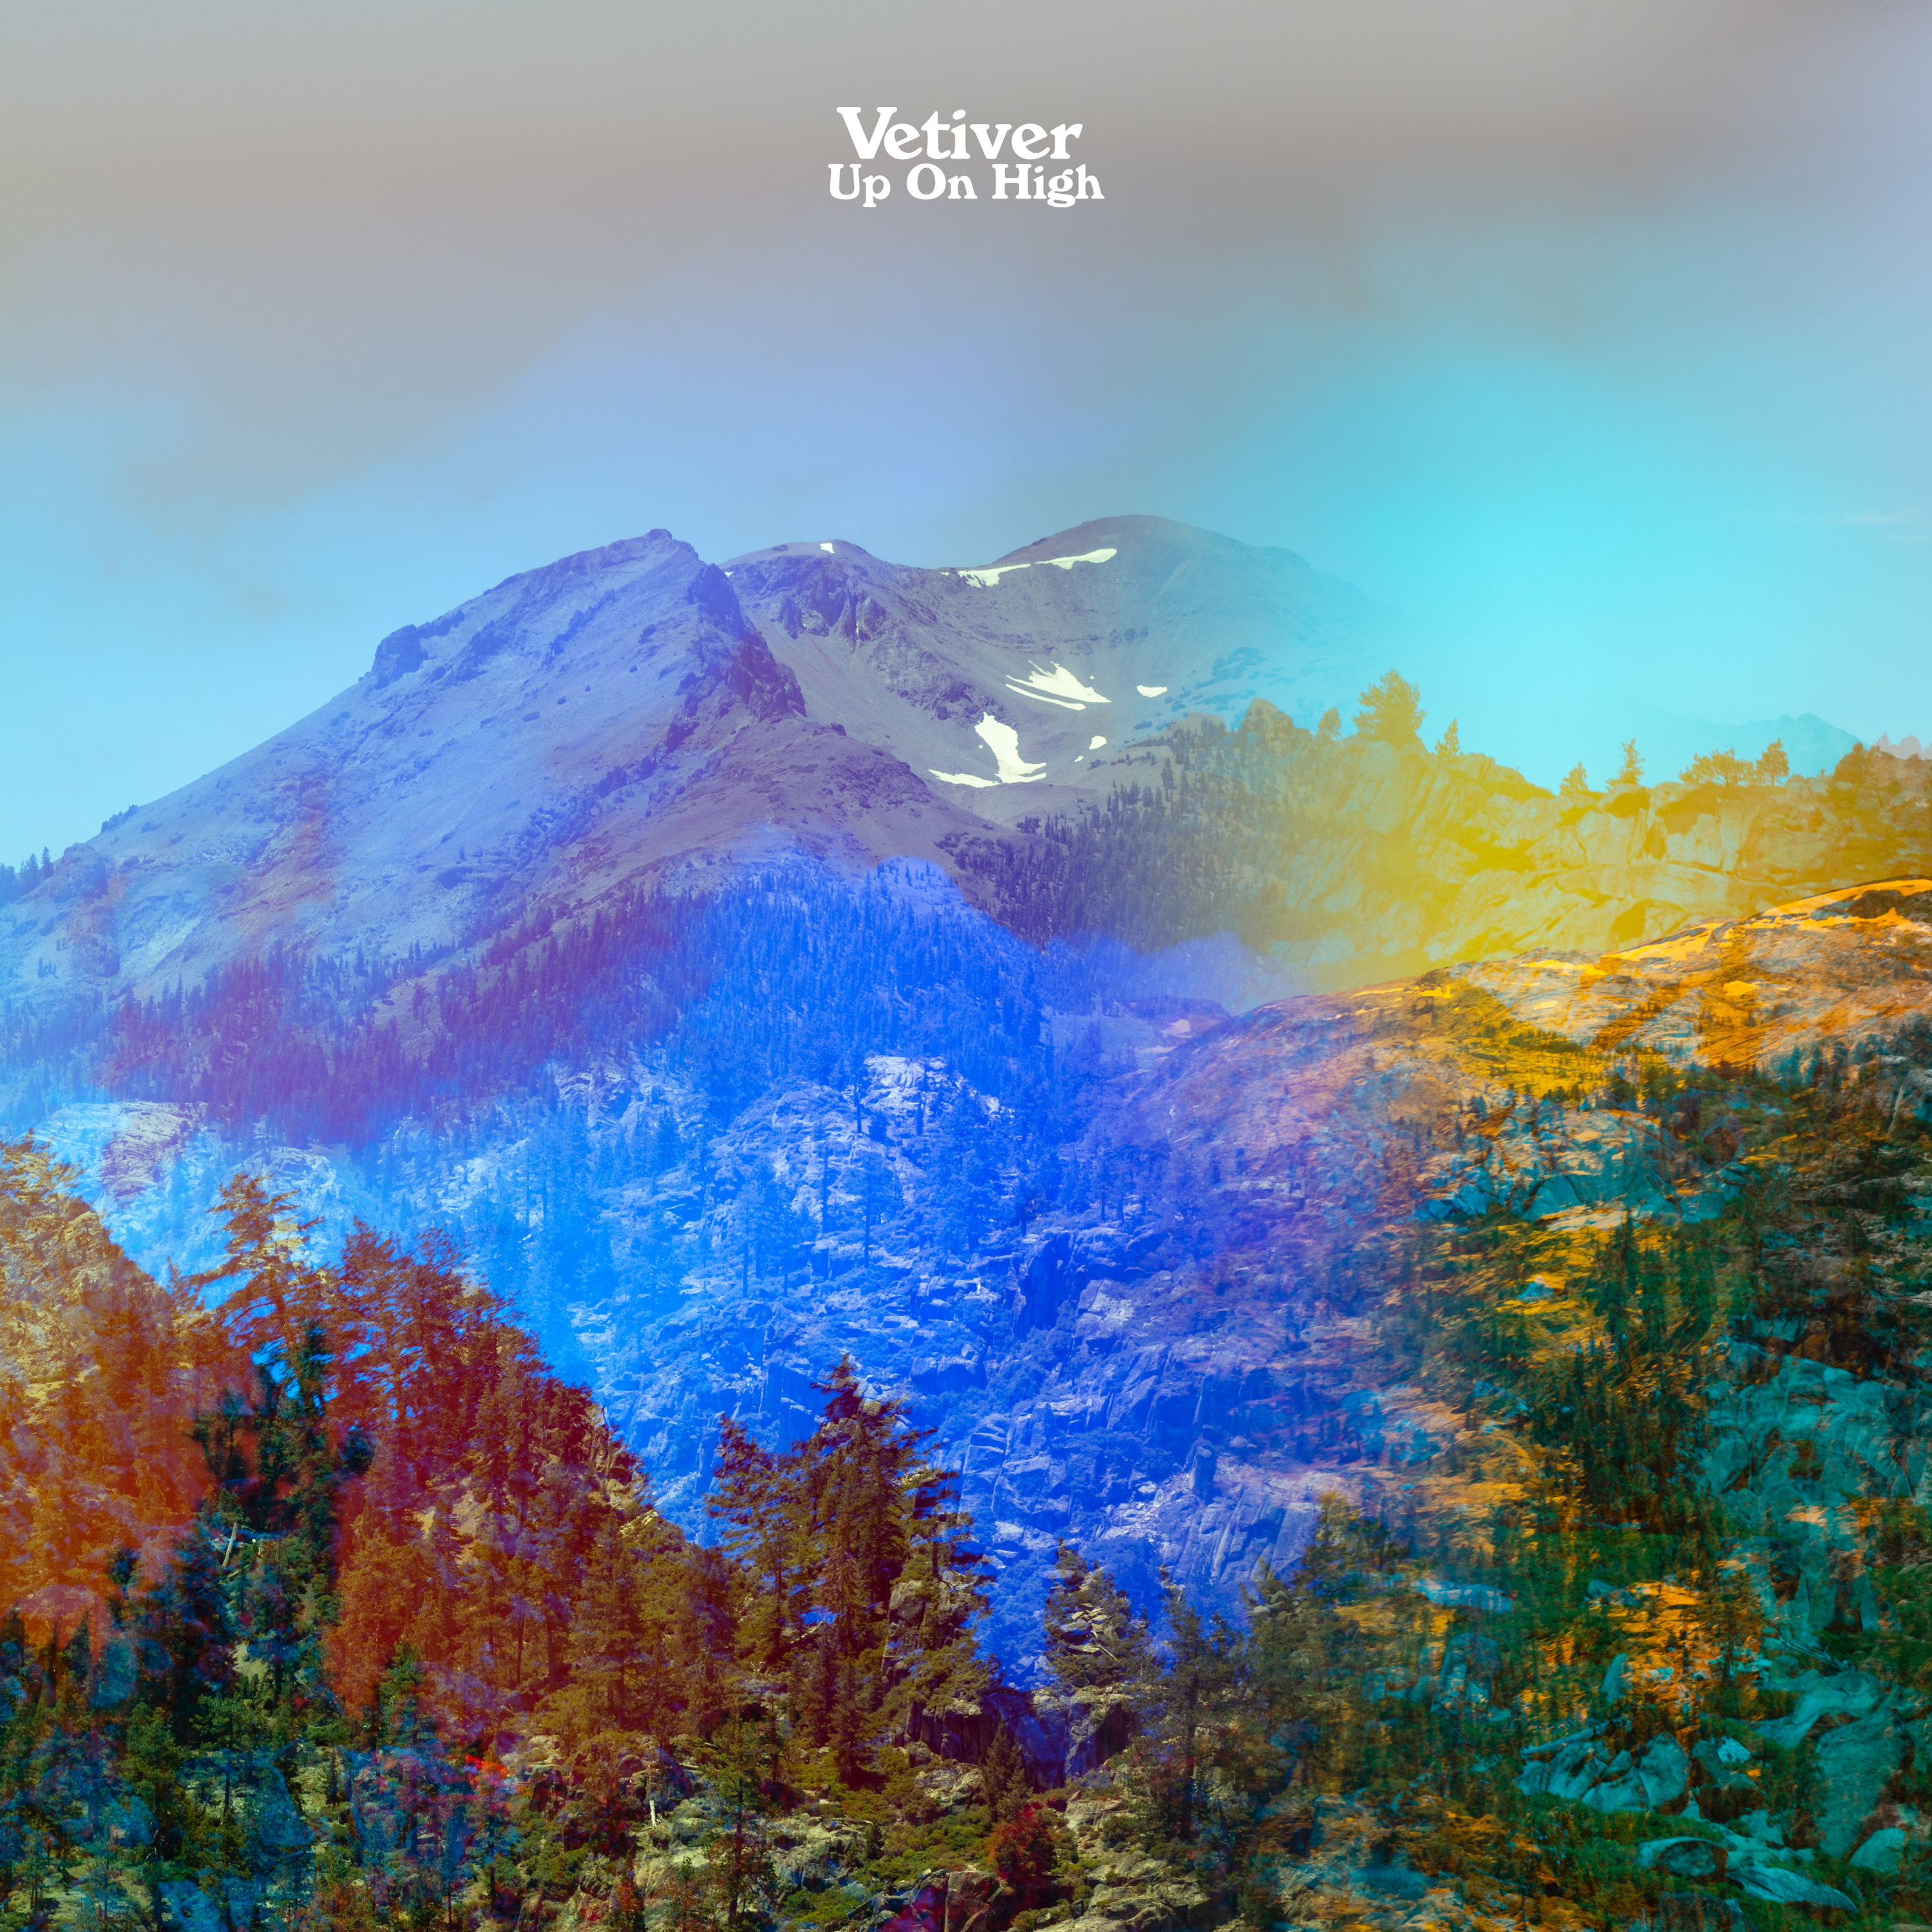 Album Art for "Up on High" by Vetiver